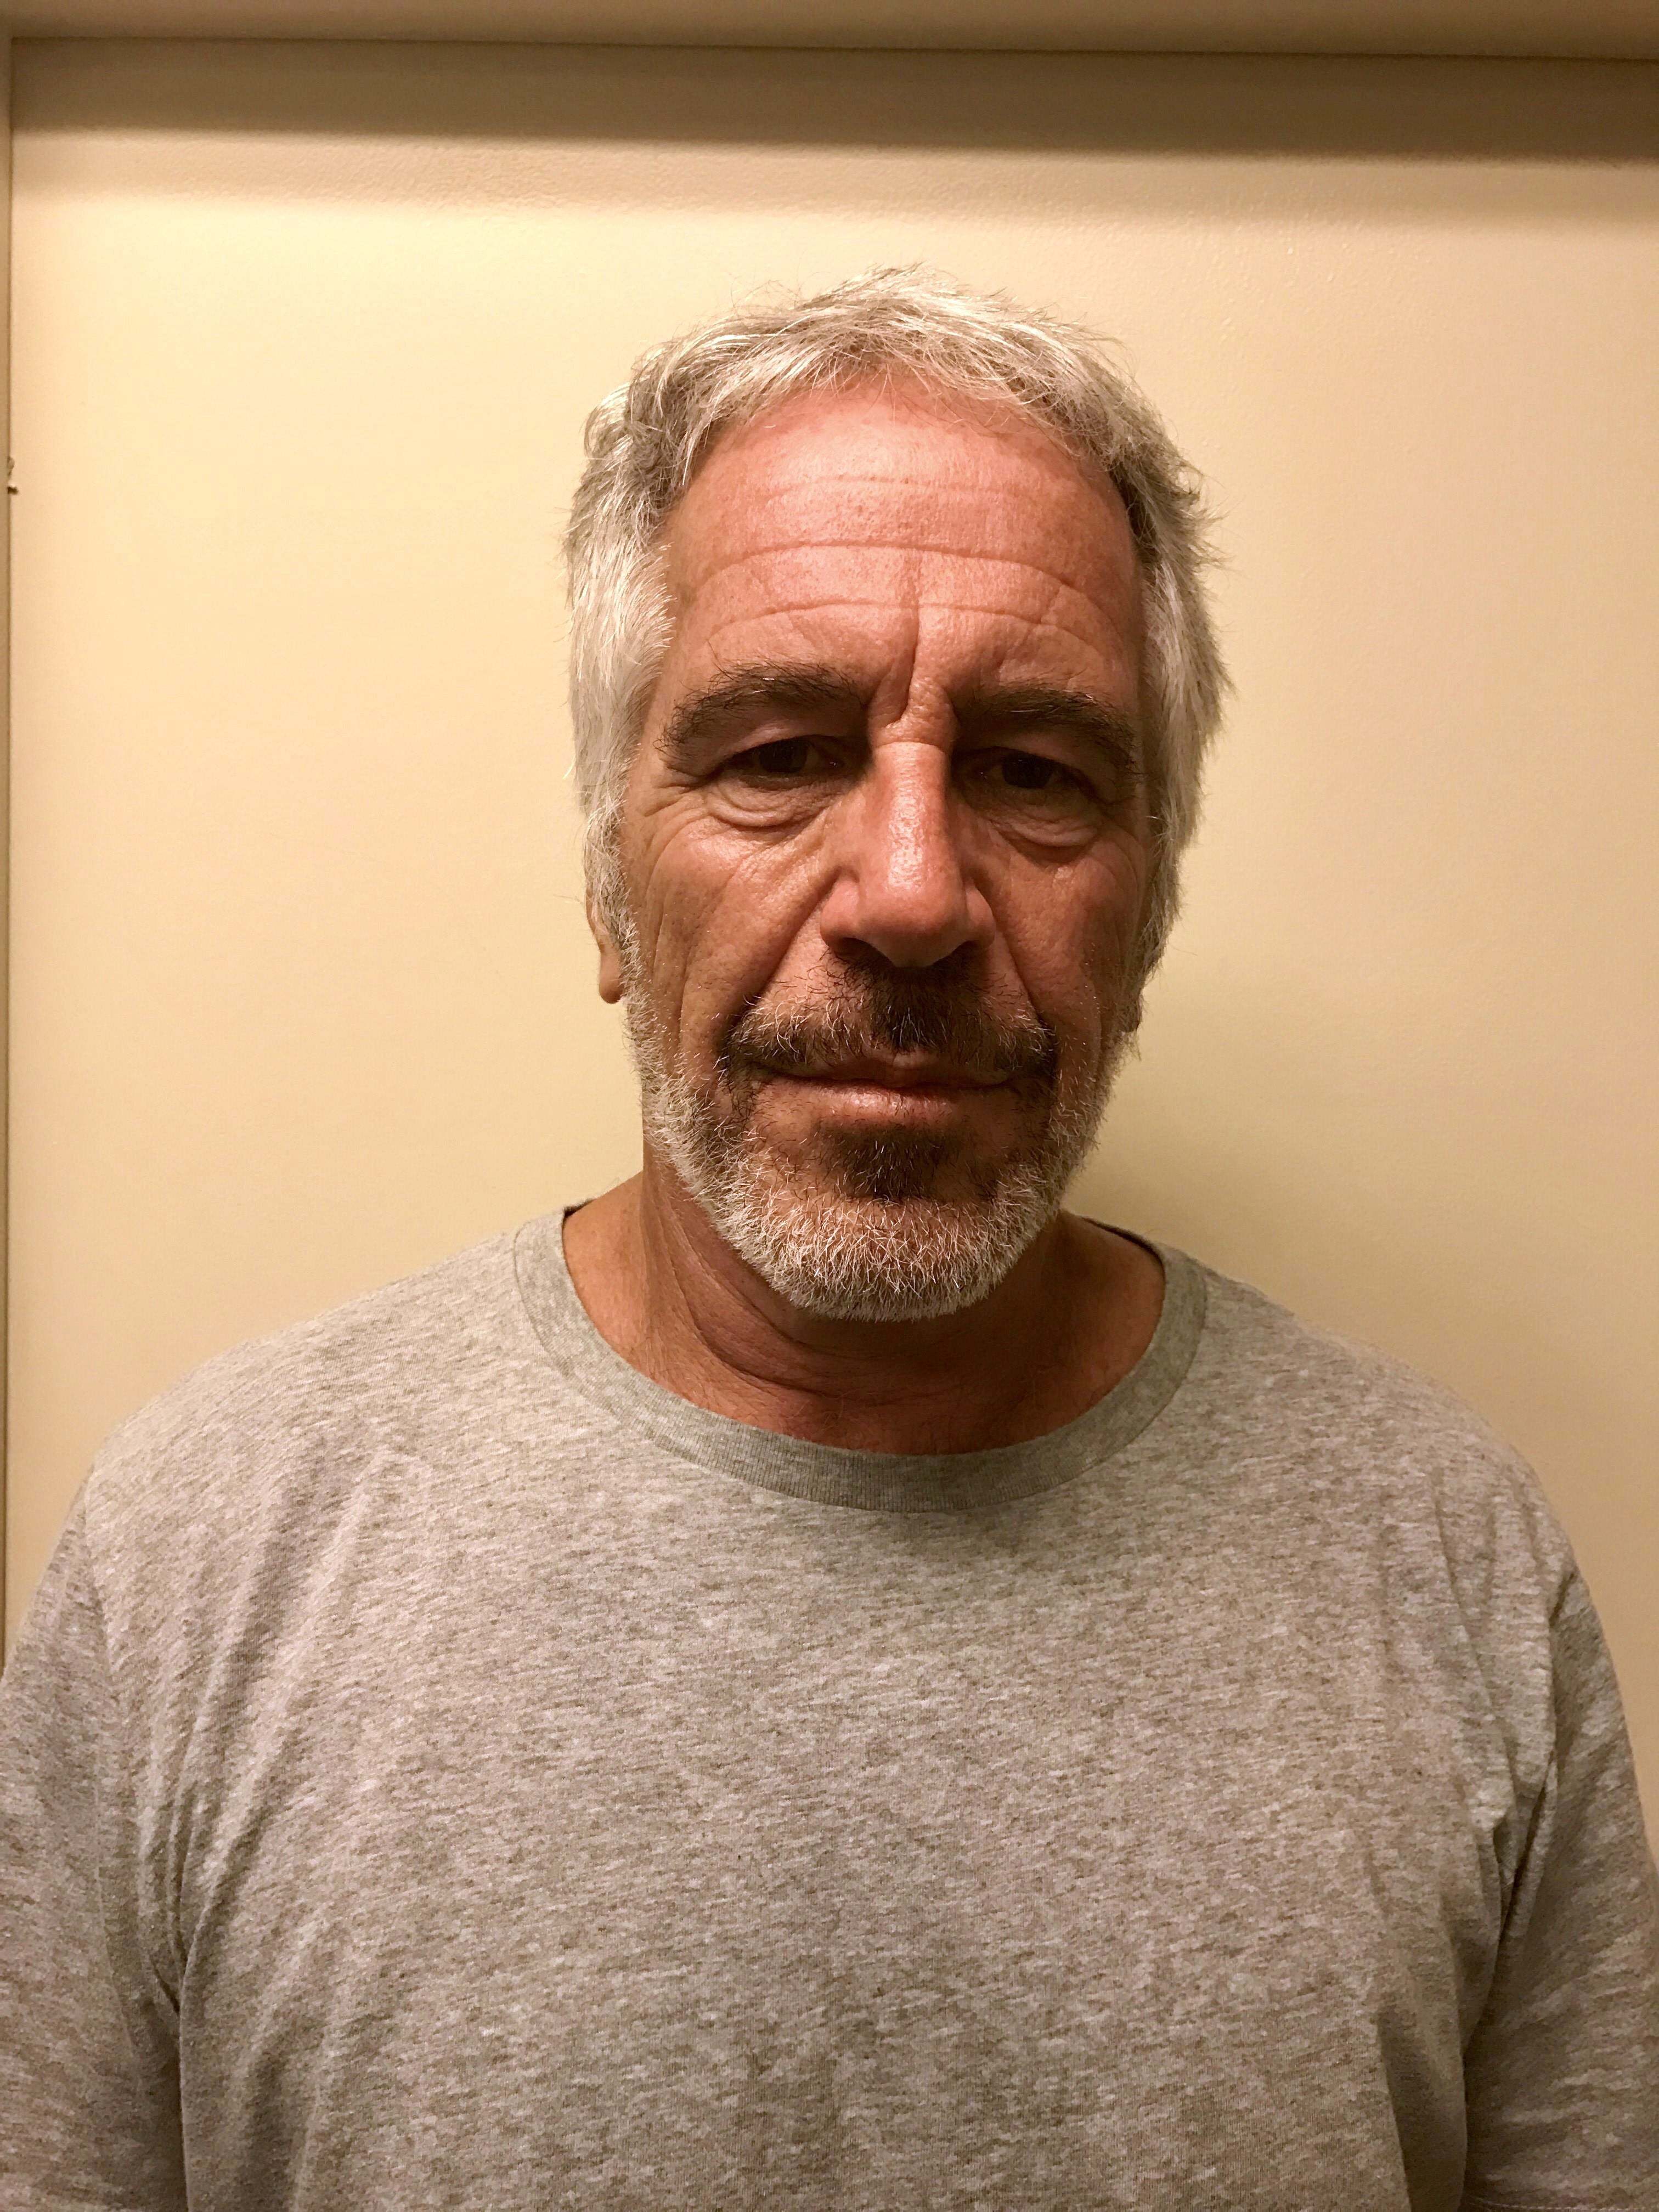 Jeffrey Epstein killed himself while awaiting trial on sex trafficking charges